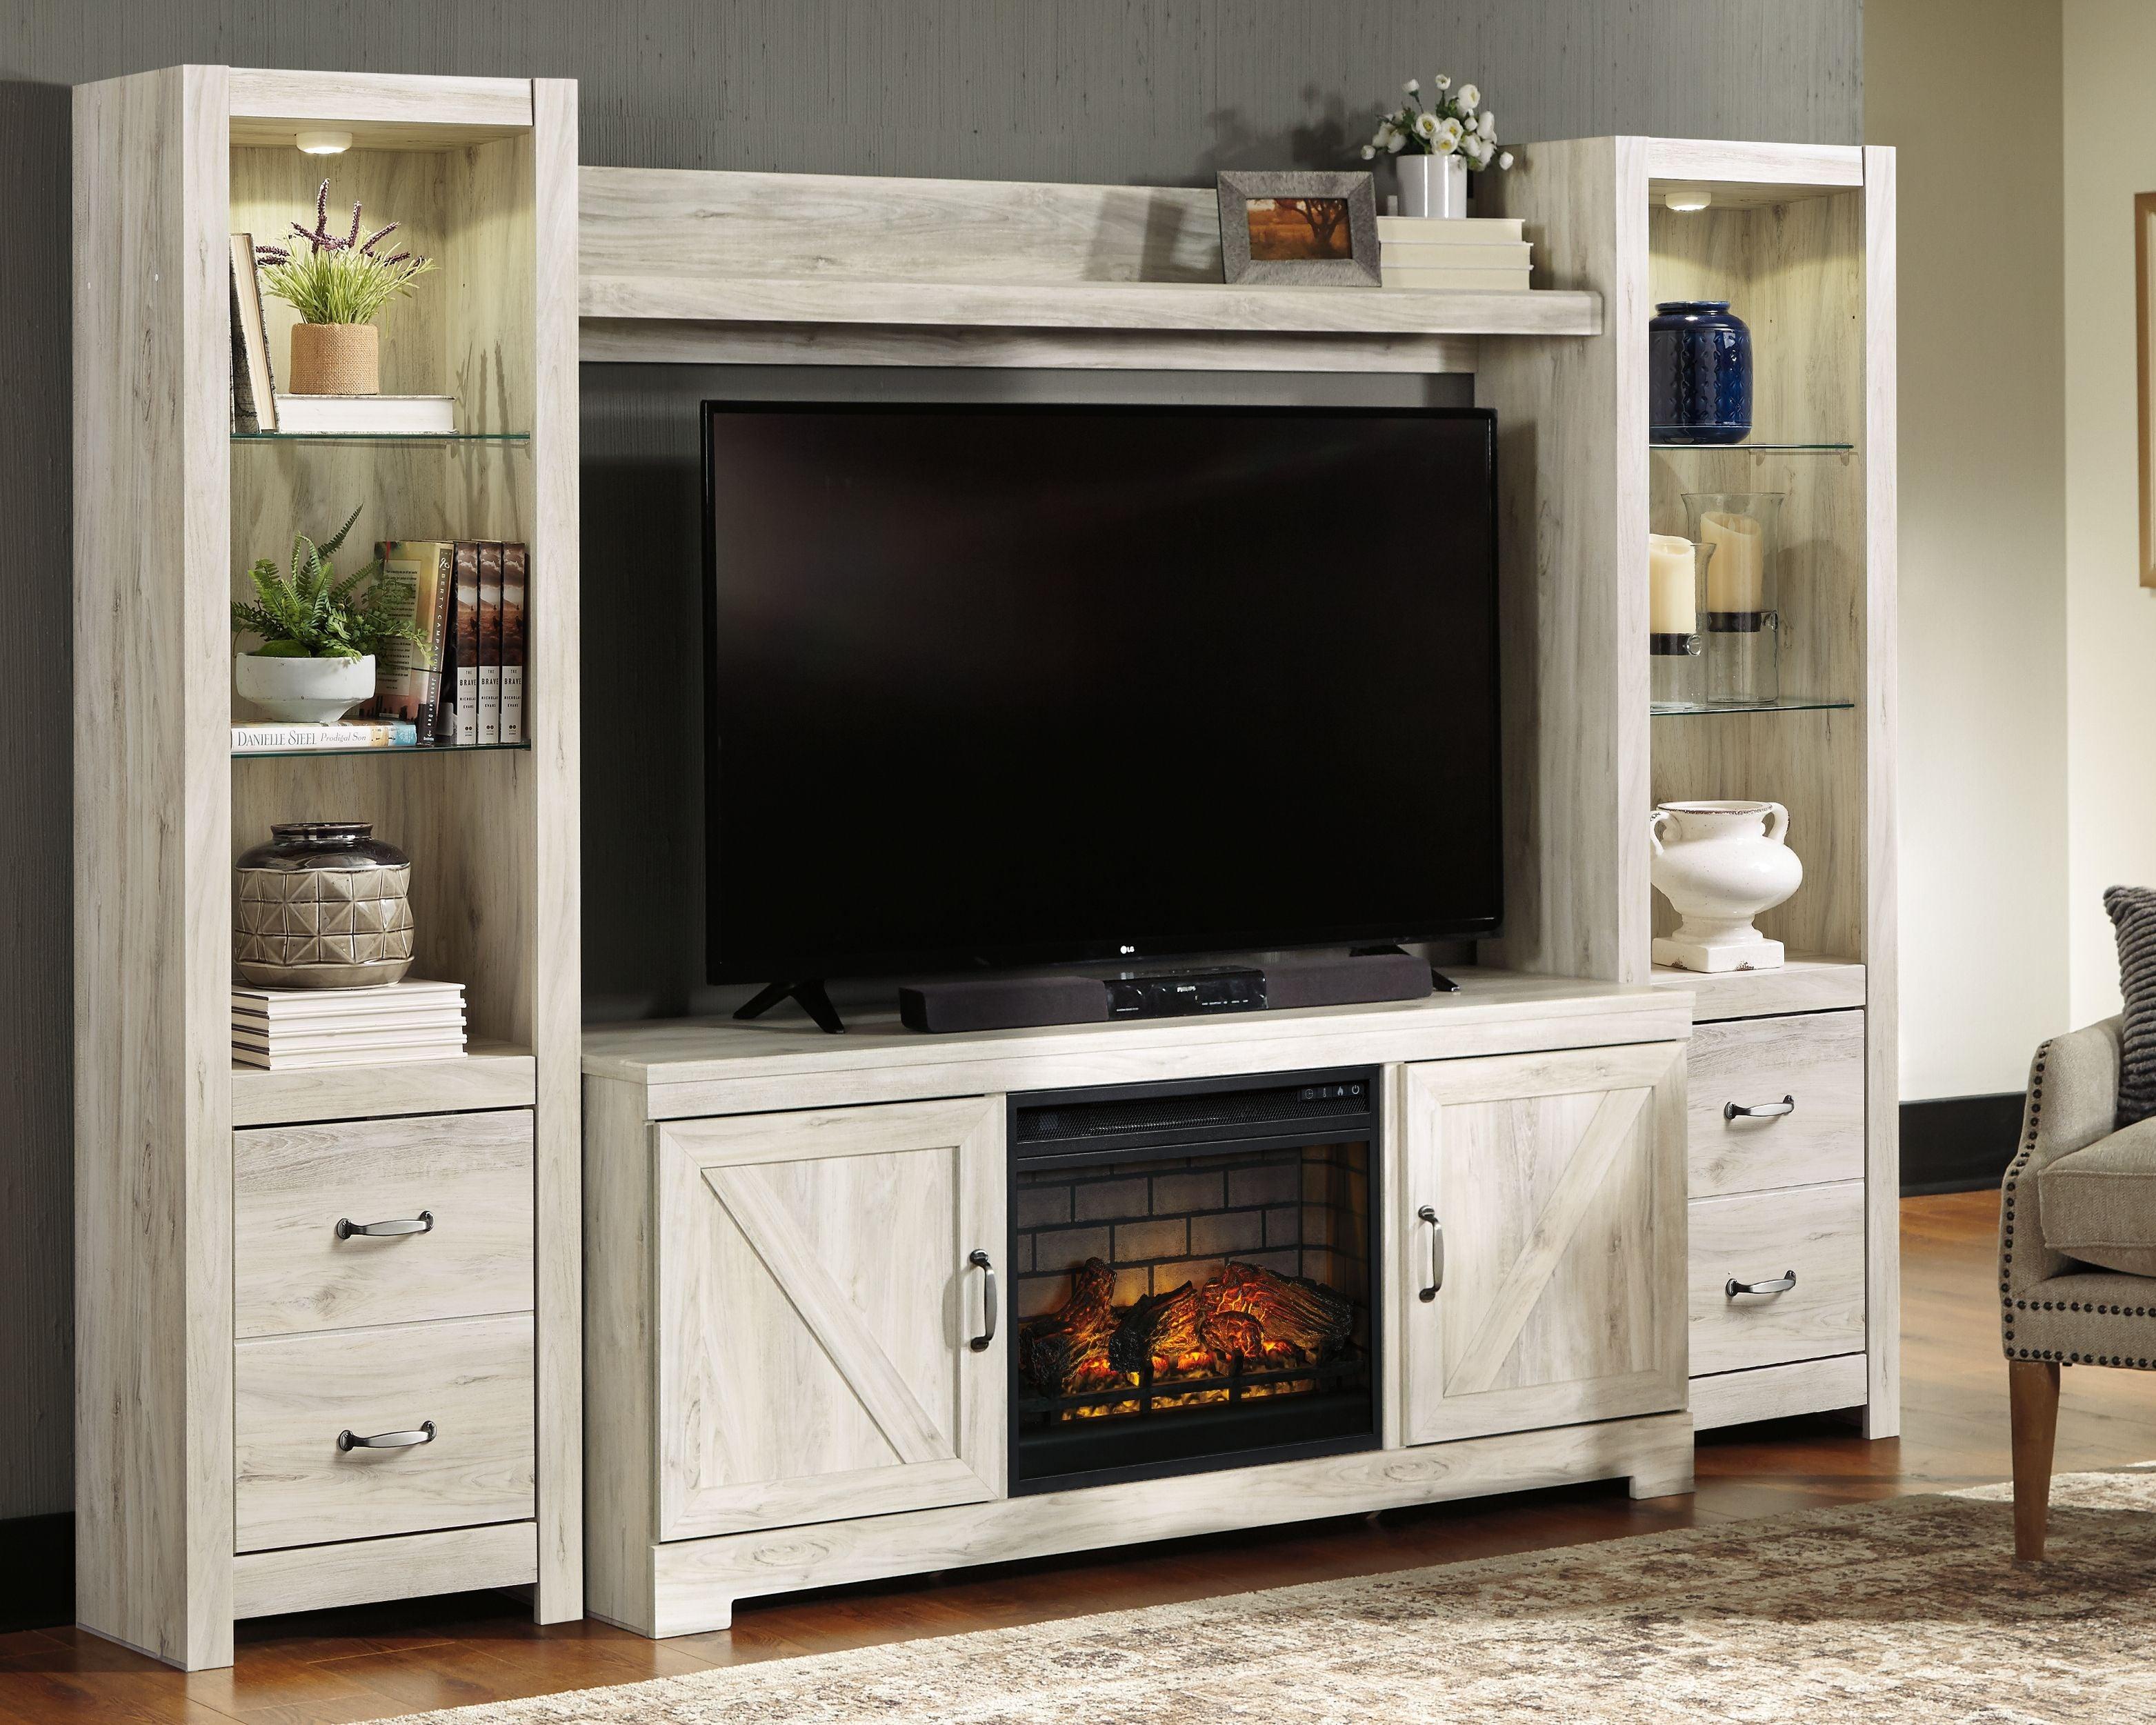 Signature Design by Ashley® - Bellaby - Whitewash - Entertainment Center - TV Stand With Faux Firebrick Fireplace Insert - 5th Avenue Furniture